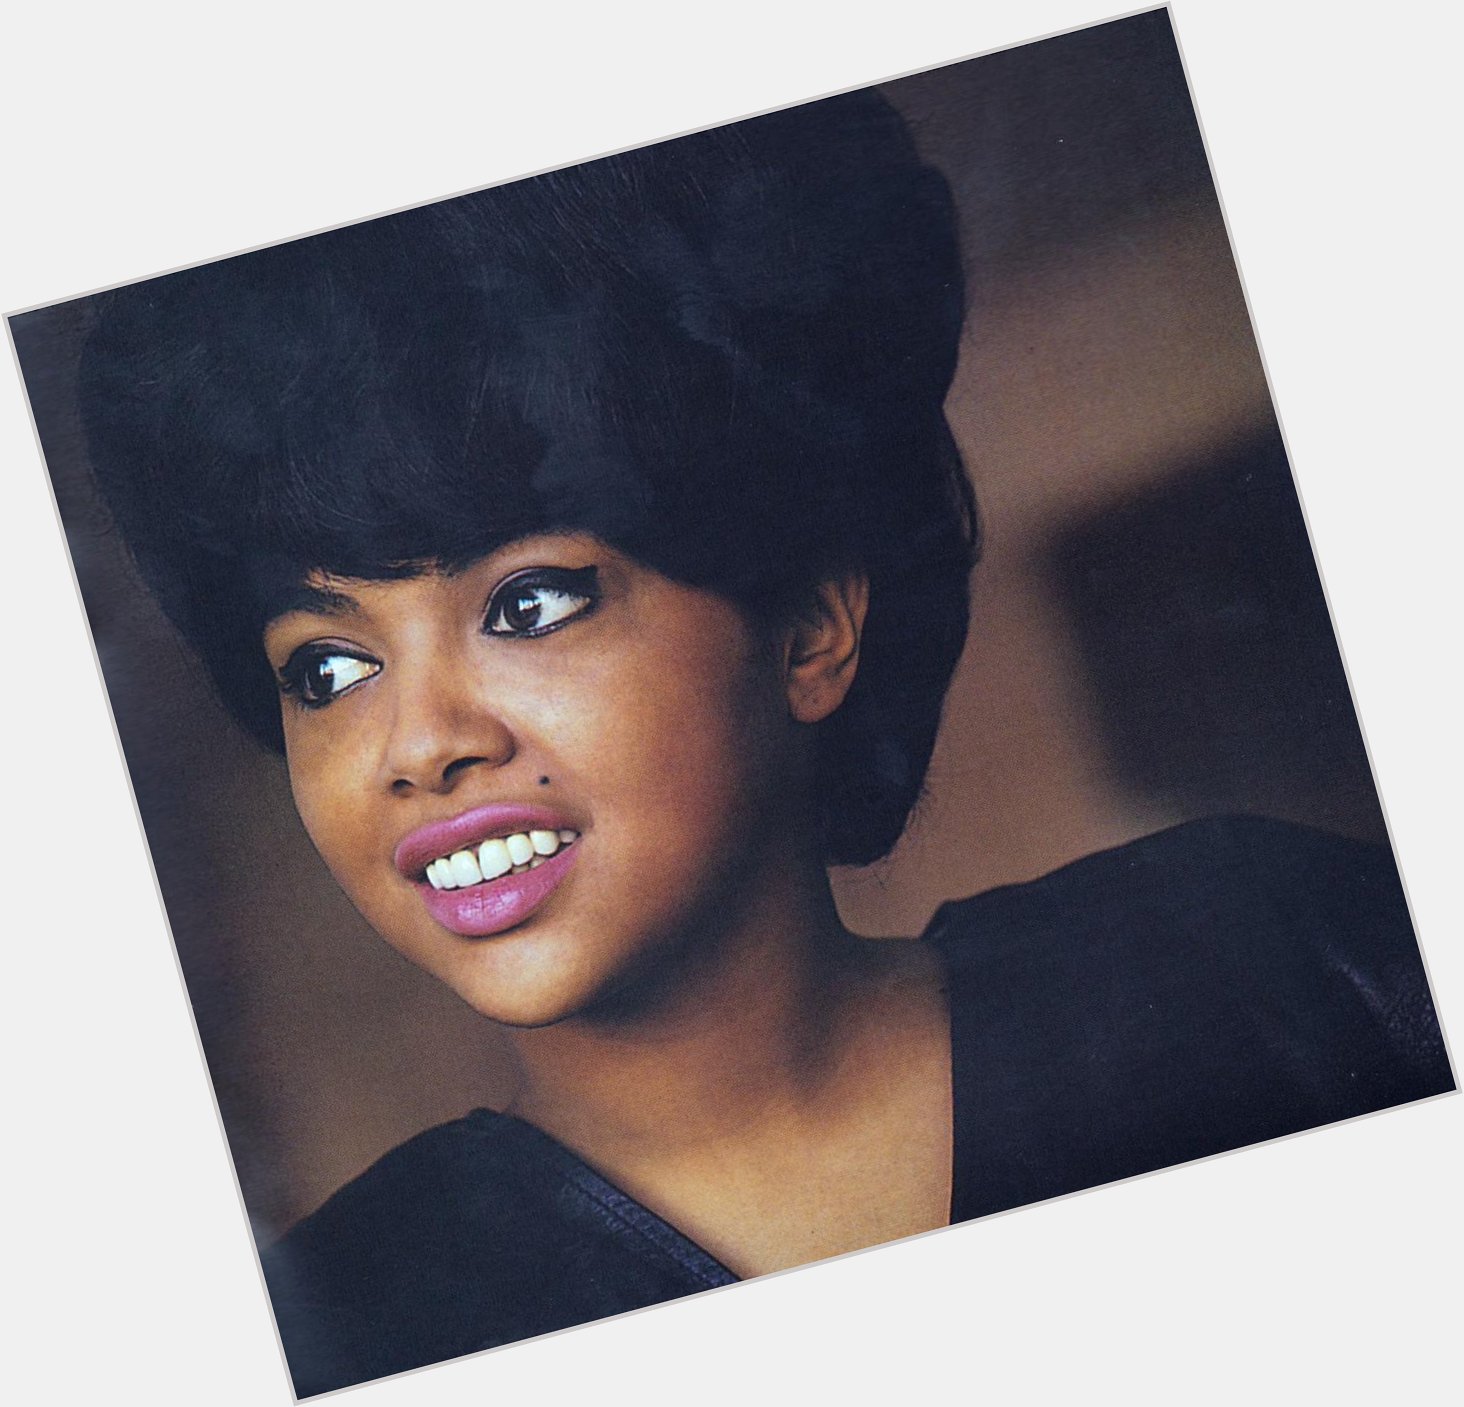 And a happy birthday to Tammi Terrell who would have turned 70 today. 